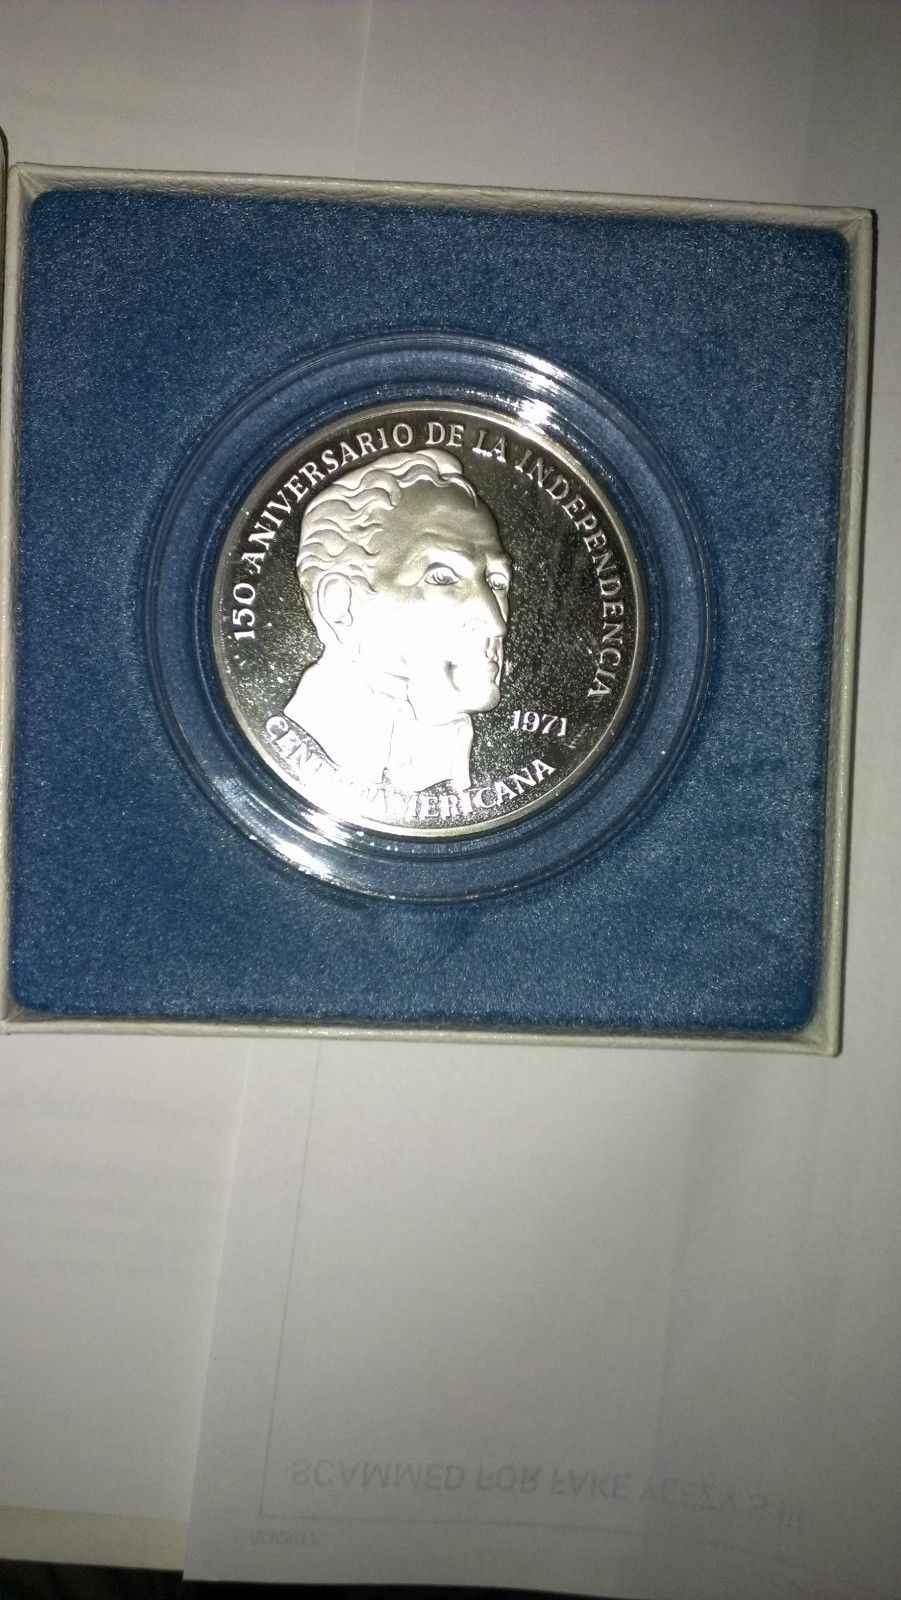 20 Balboas Panama 1971 Proof Coin 2k grn Sterling  + Certificate of Authenticity - $2,500.00